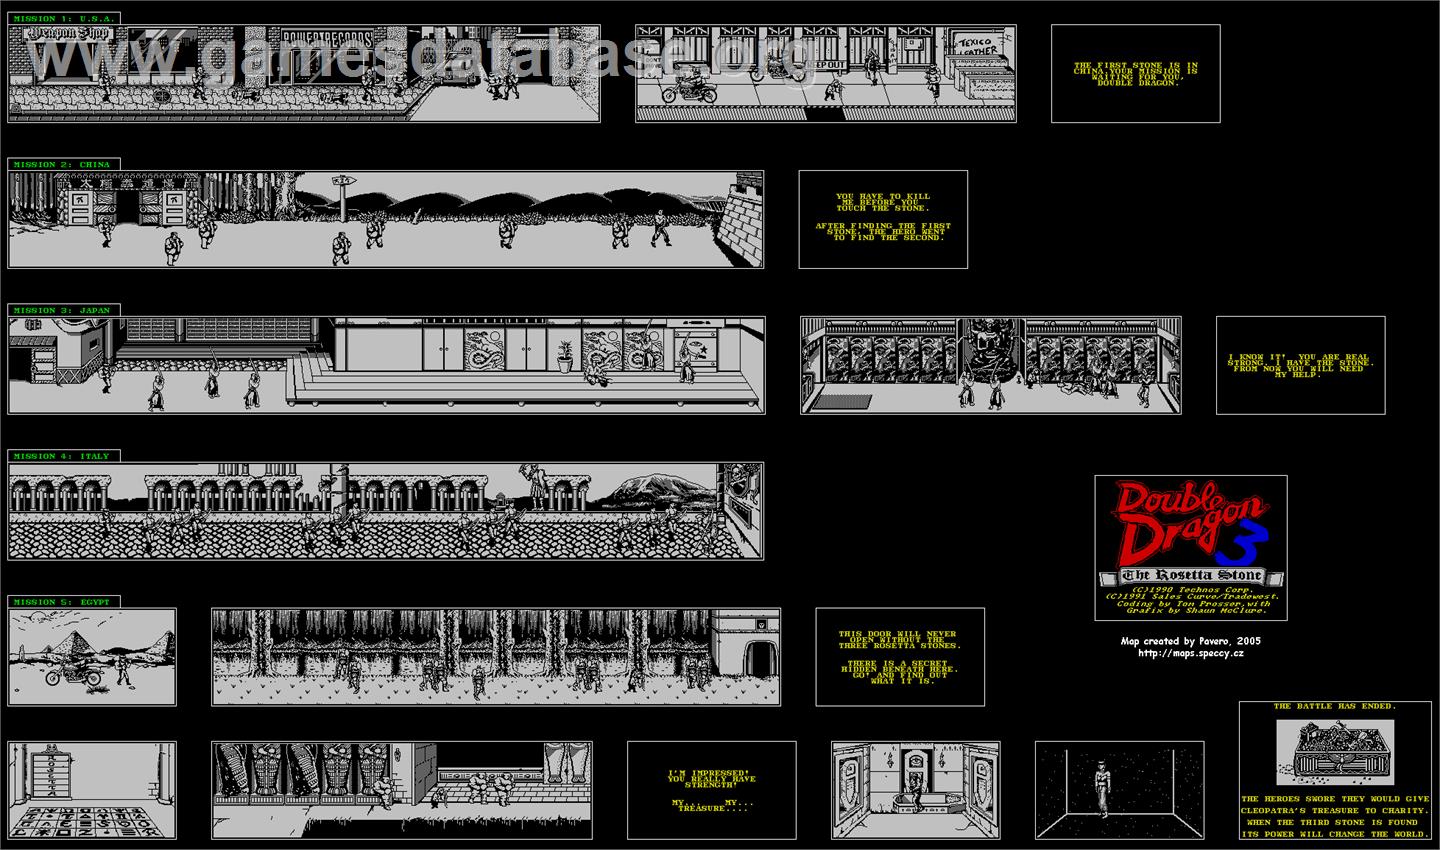 Double Dragon III: The Sacred Stones - Sinclair ZX Spectrum - Artwork - Map